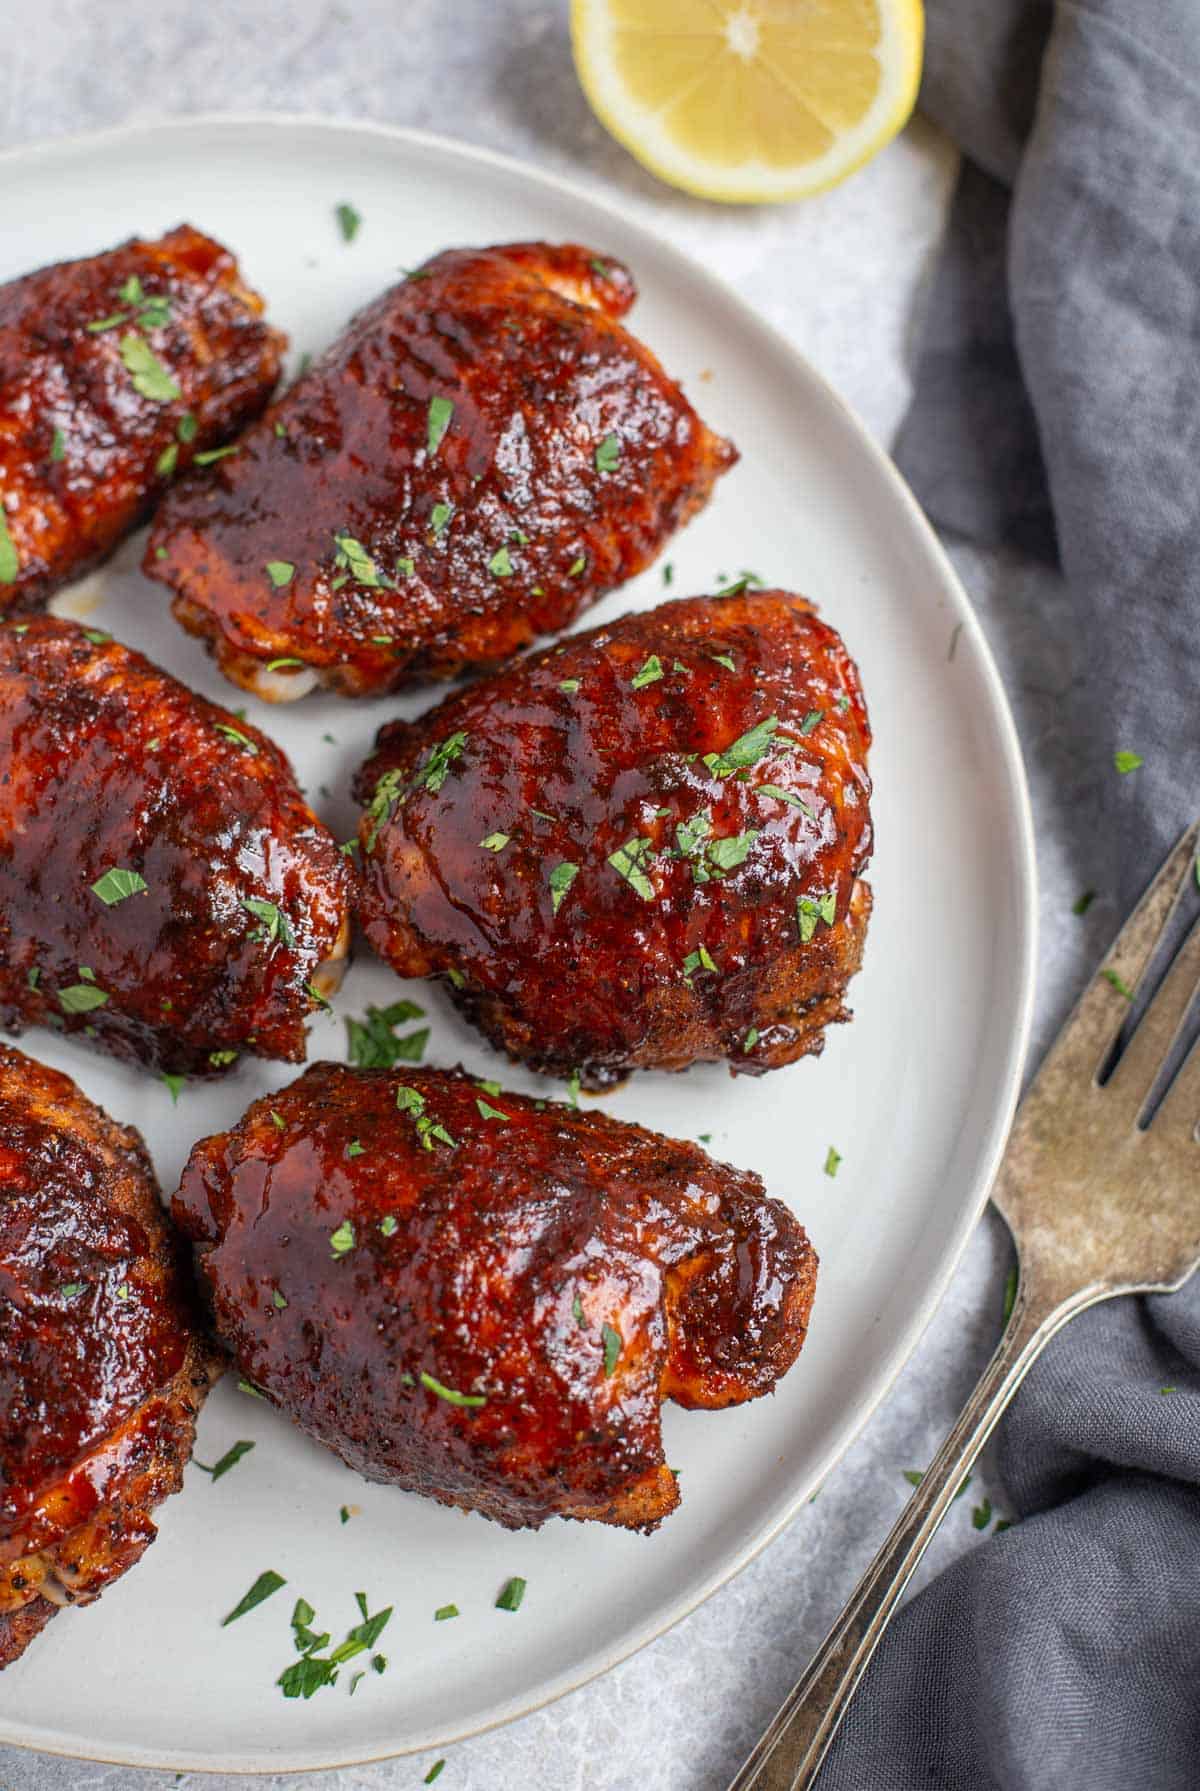 Pellet grilled chicken thighs on a white platter